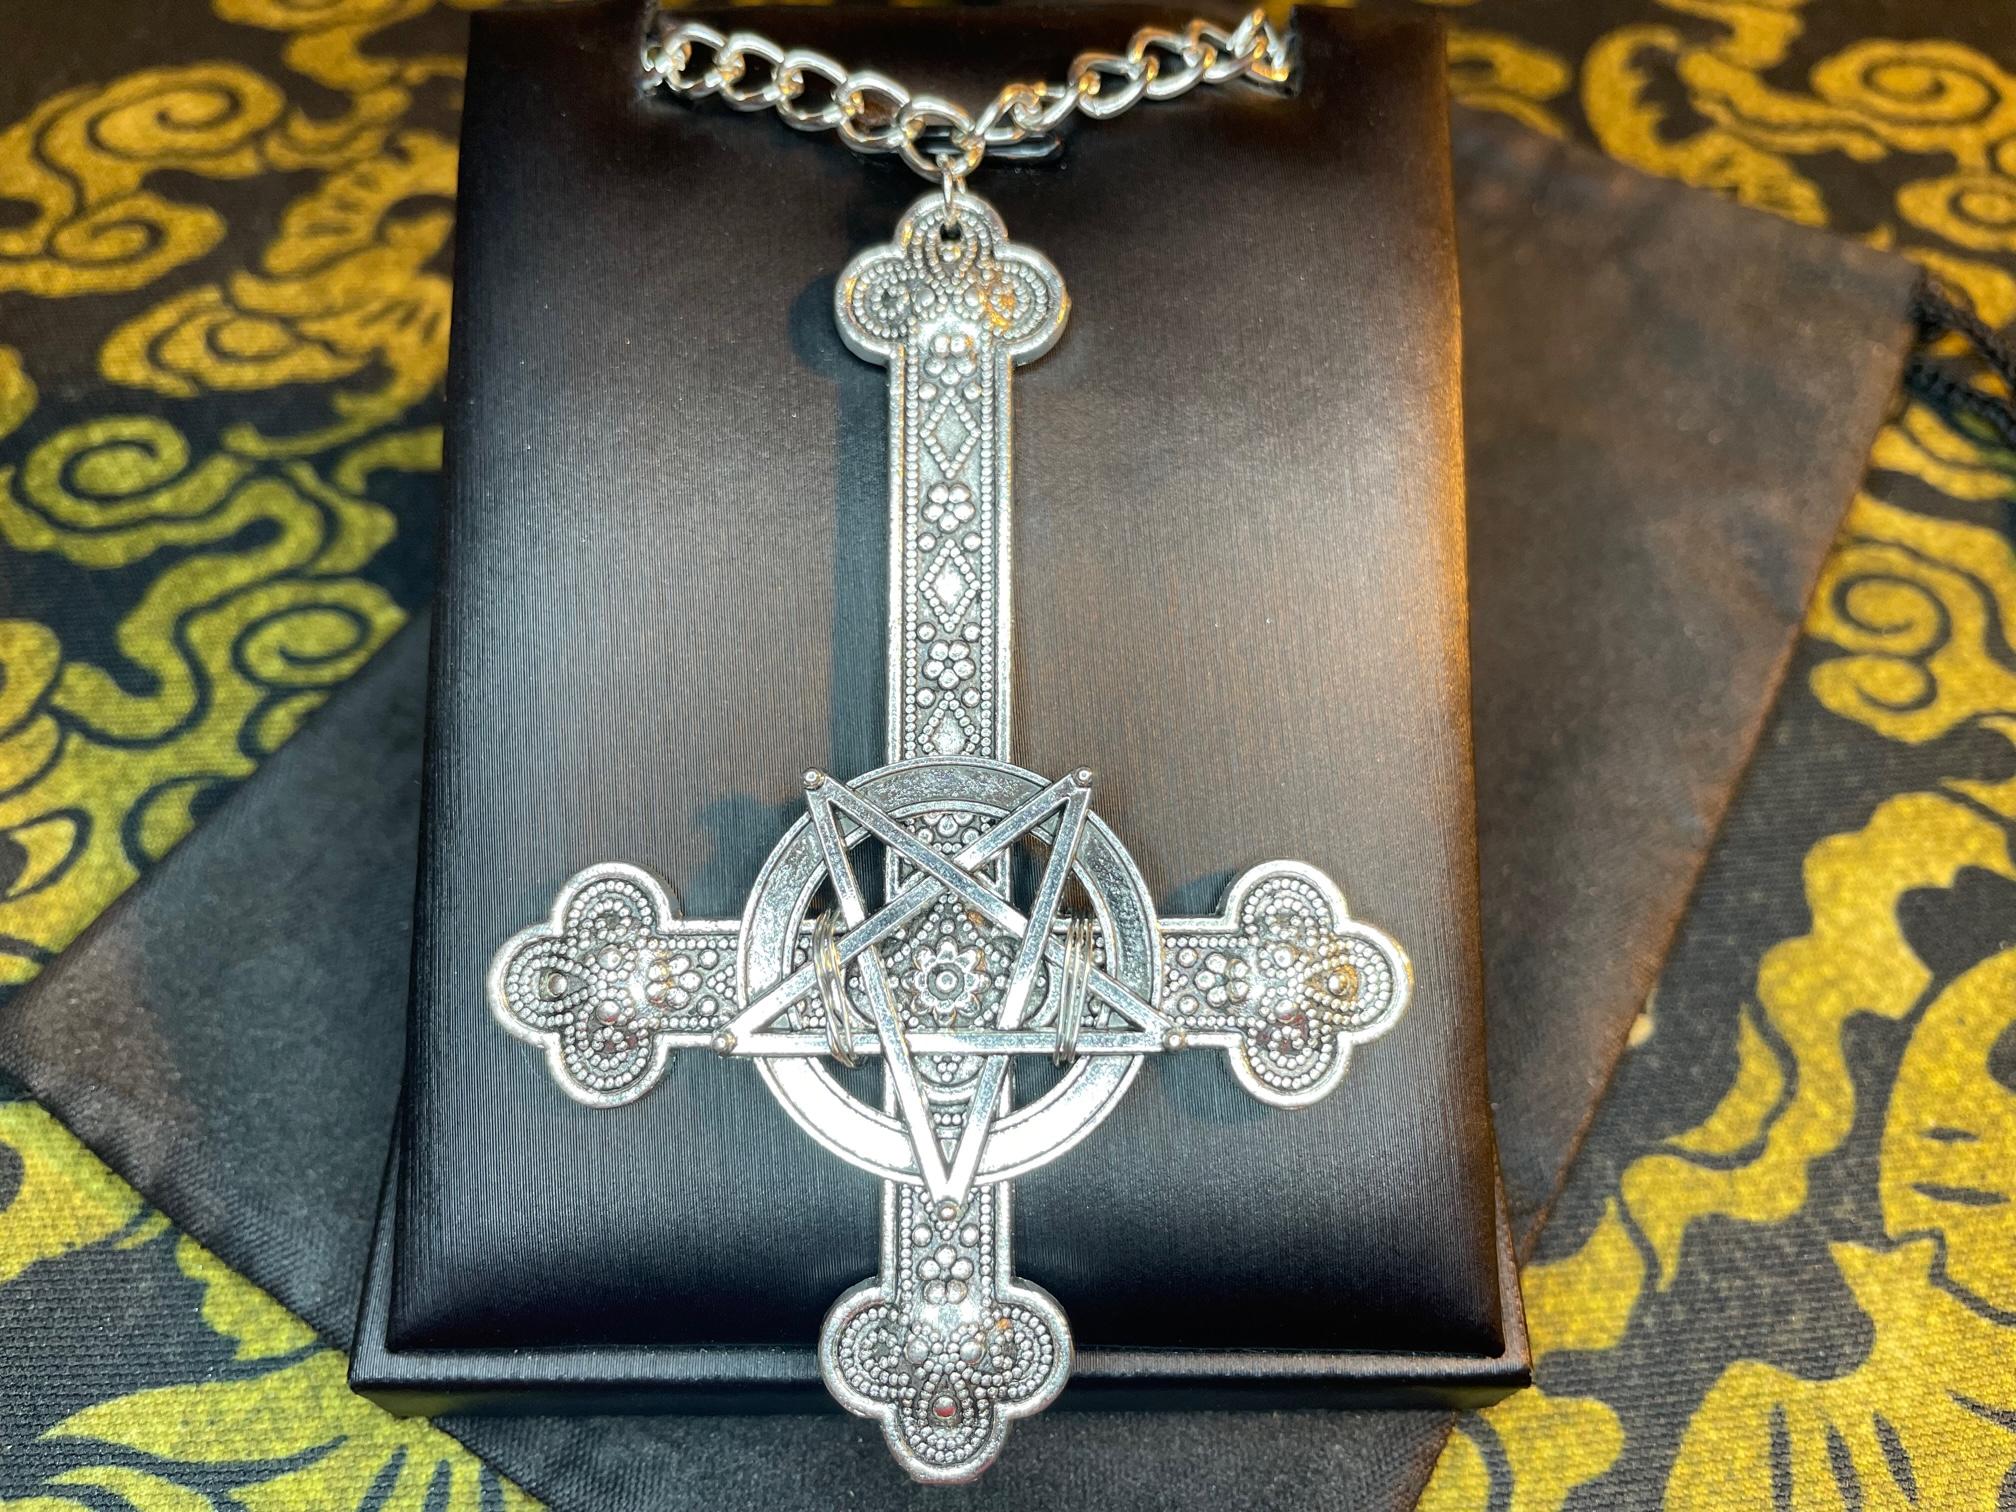 large ornate upside down cross inverted pentagram crucifix aluminum pendant necklace gothic satanic wiccan pagan occult darkness jewelry silver